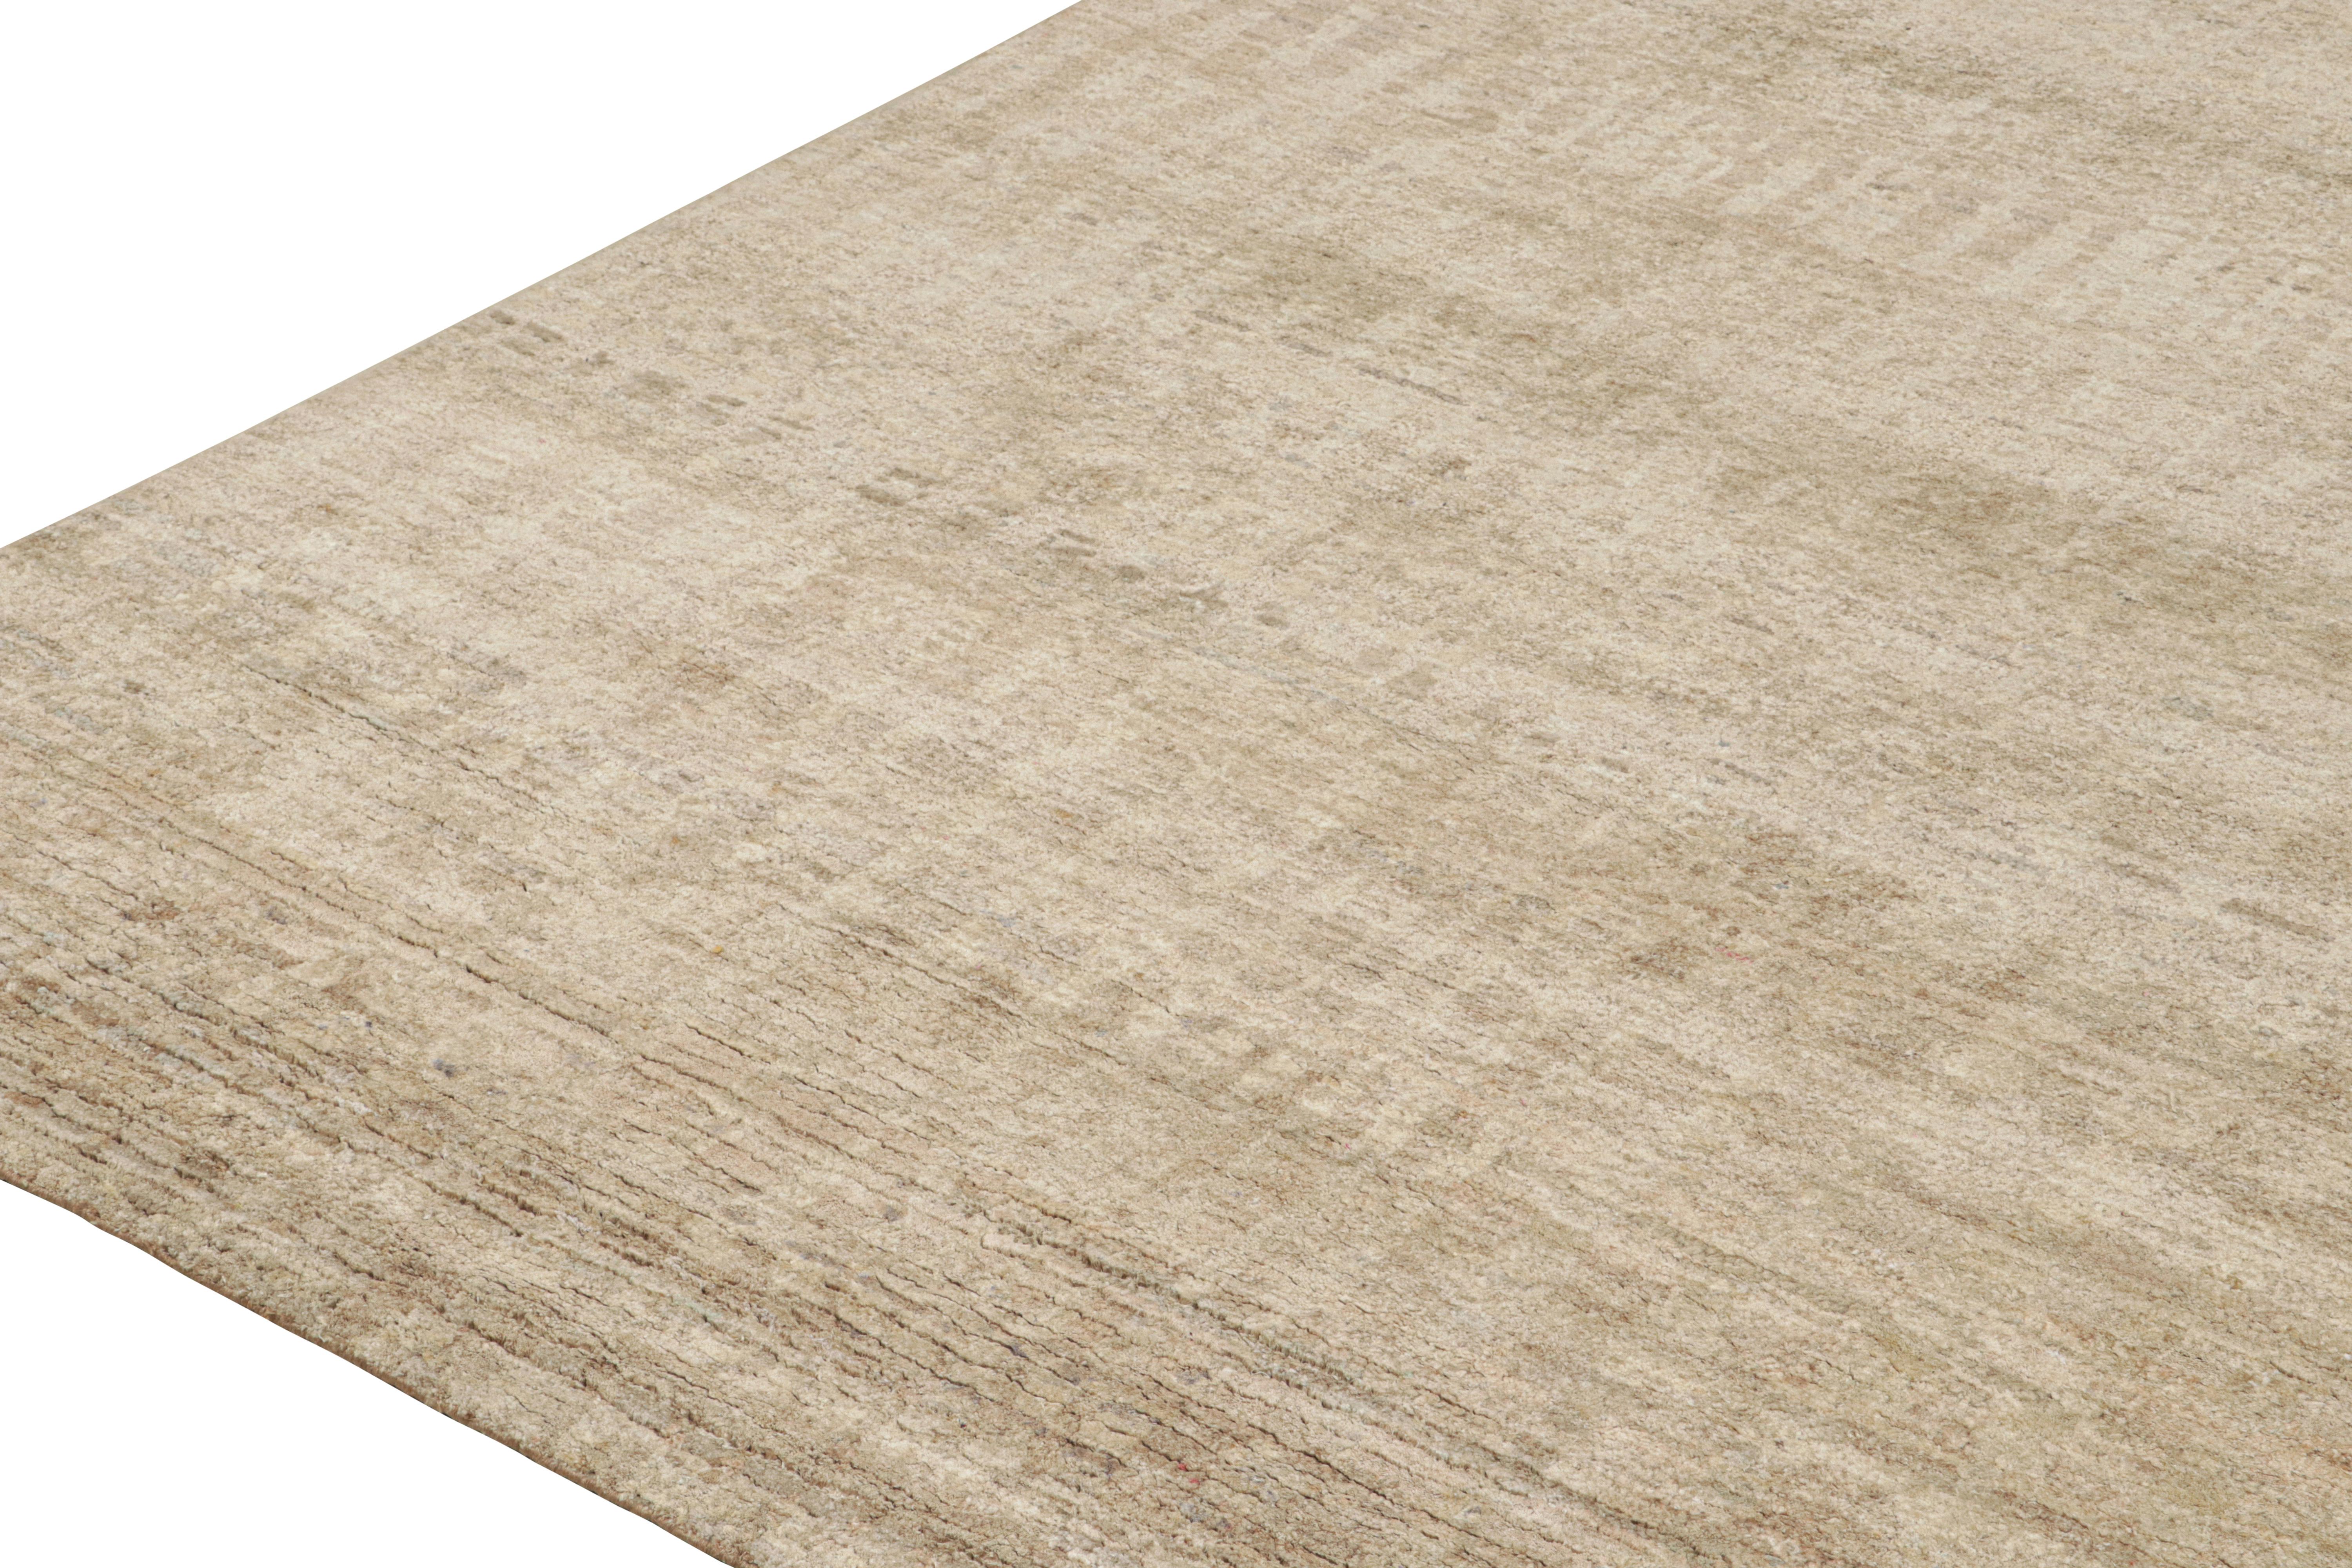 Hand-Knotted Rug & Kilim’s Contemporary Rug in Beige-Brown Tone-on-tone Striae For Sale